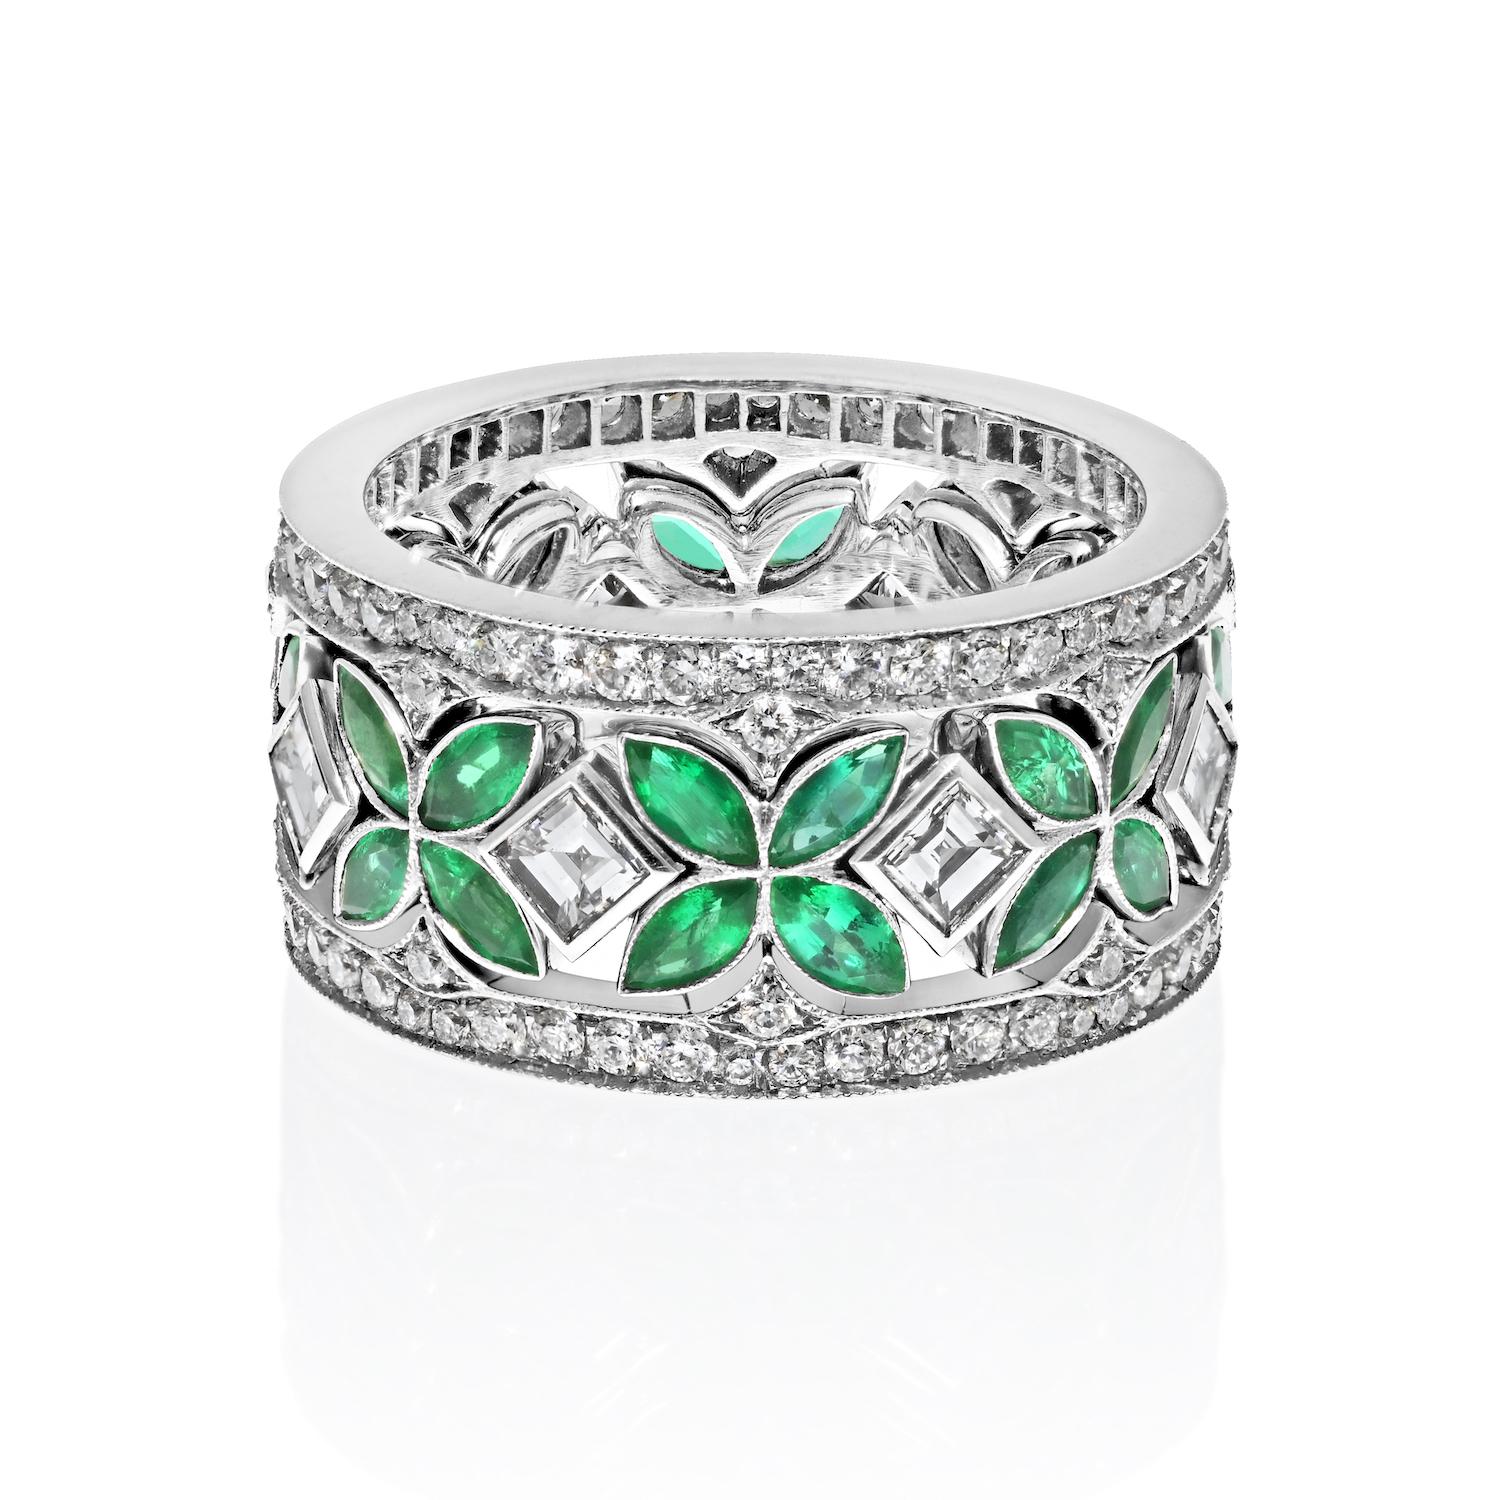 Chic and Vibrant: Your Emerald and Diamond Three-in-One Eternity Ring
Step into a world of elegance and style with this captivating emerald and diamond eternity band, a jewel that's as versatile as you are. Whether you're celebrating a May birthday,